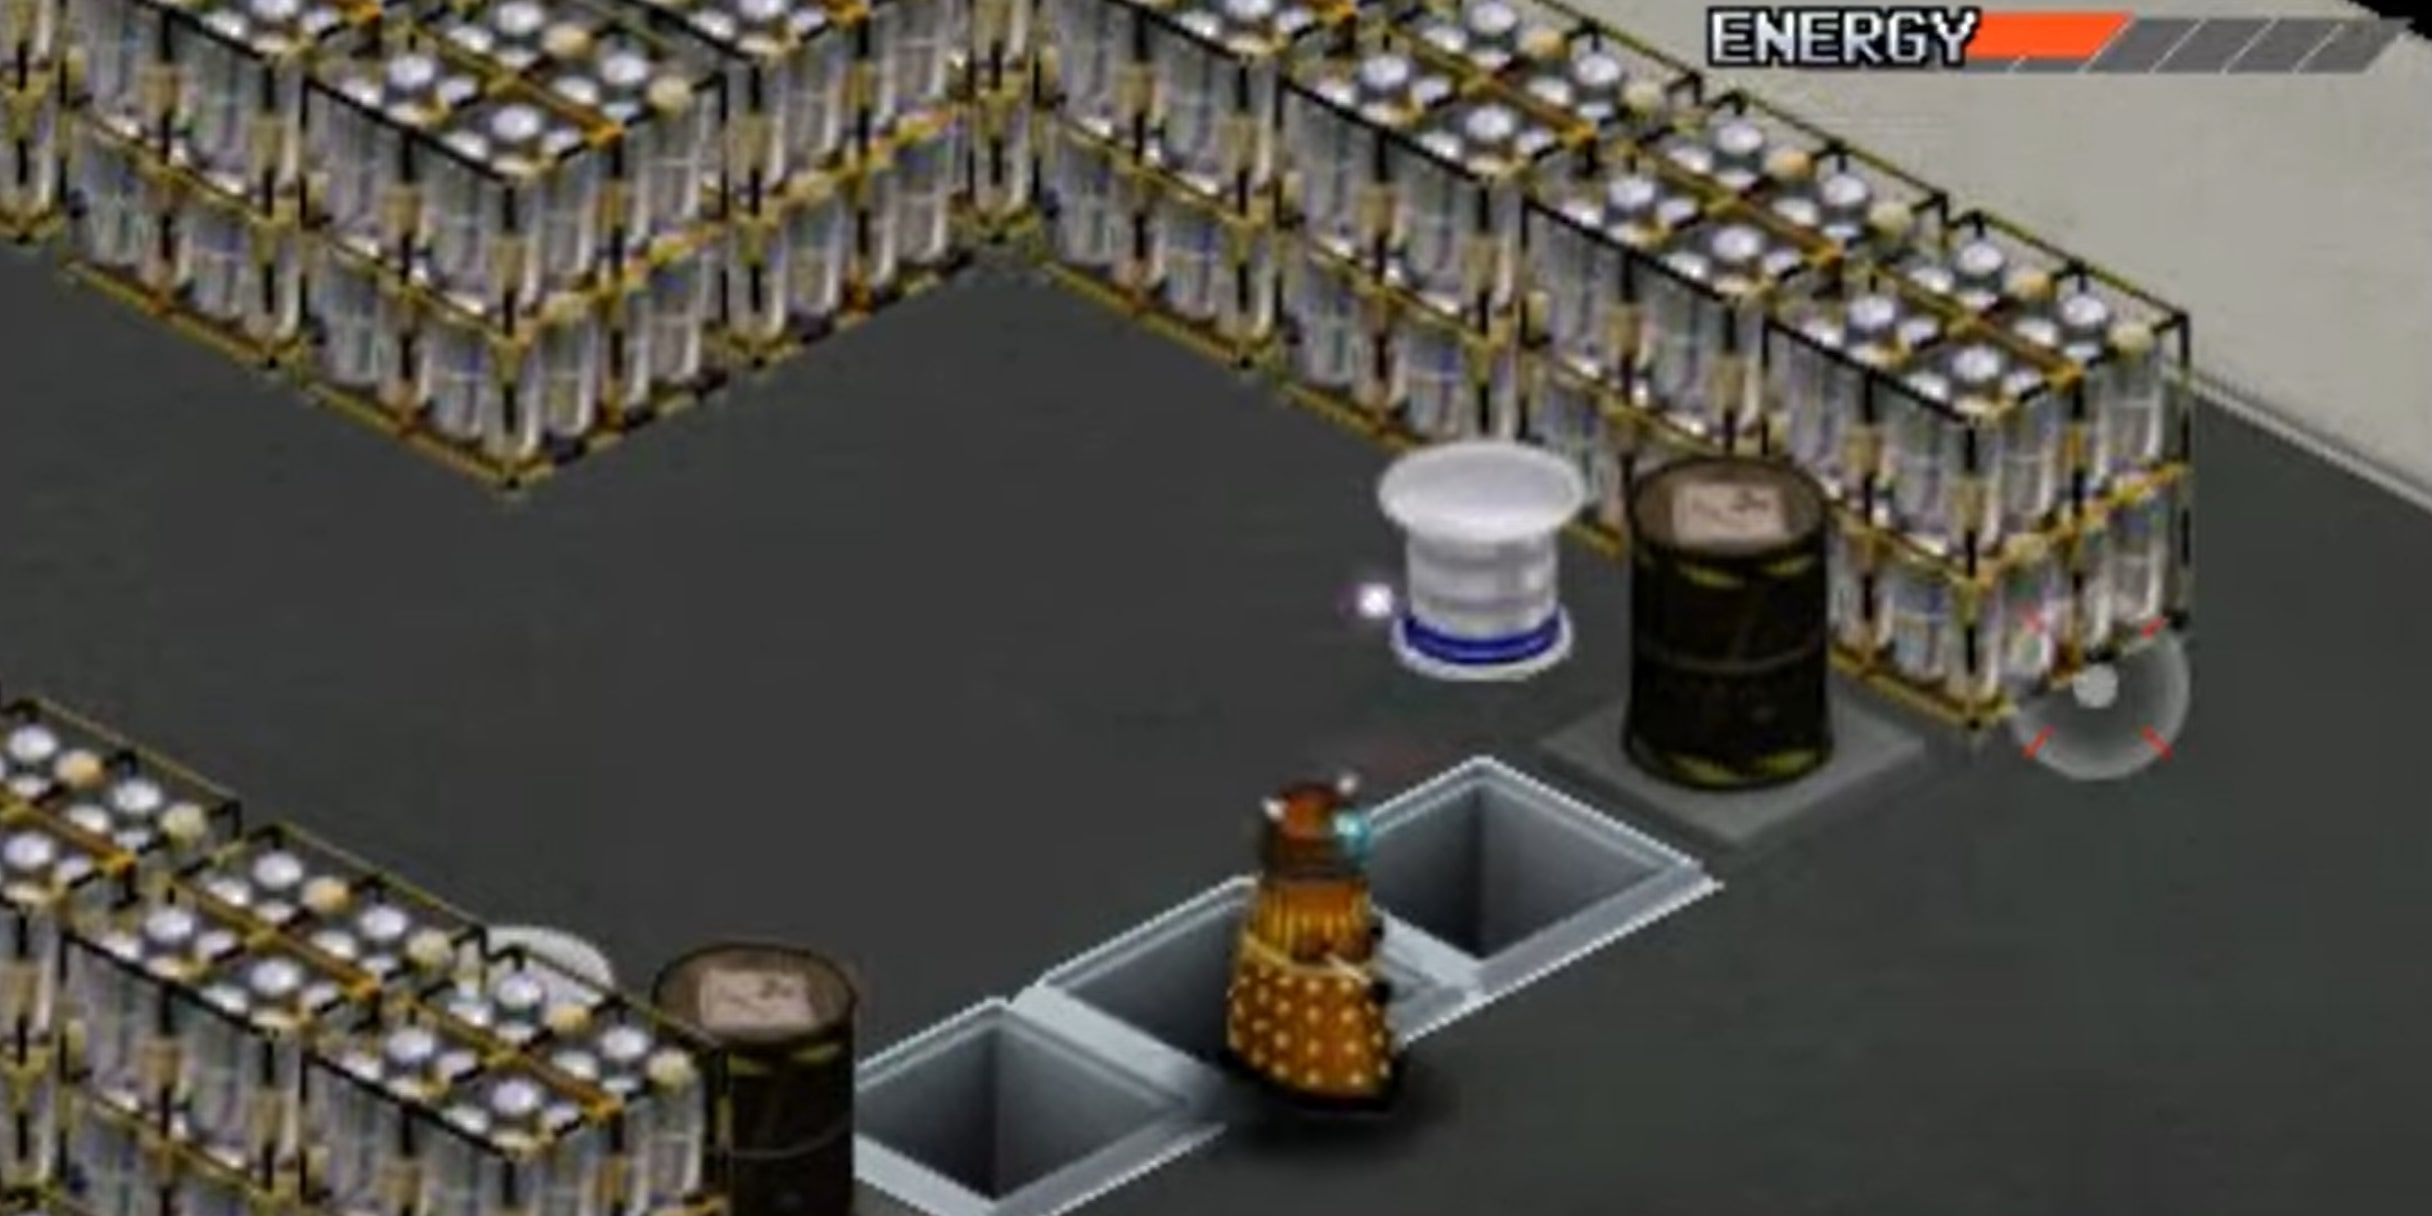 Gameplay of the Doctor Who flash game The Last Dalek